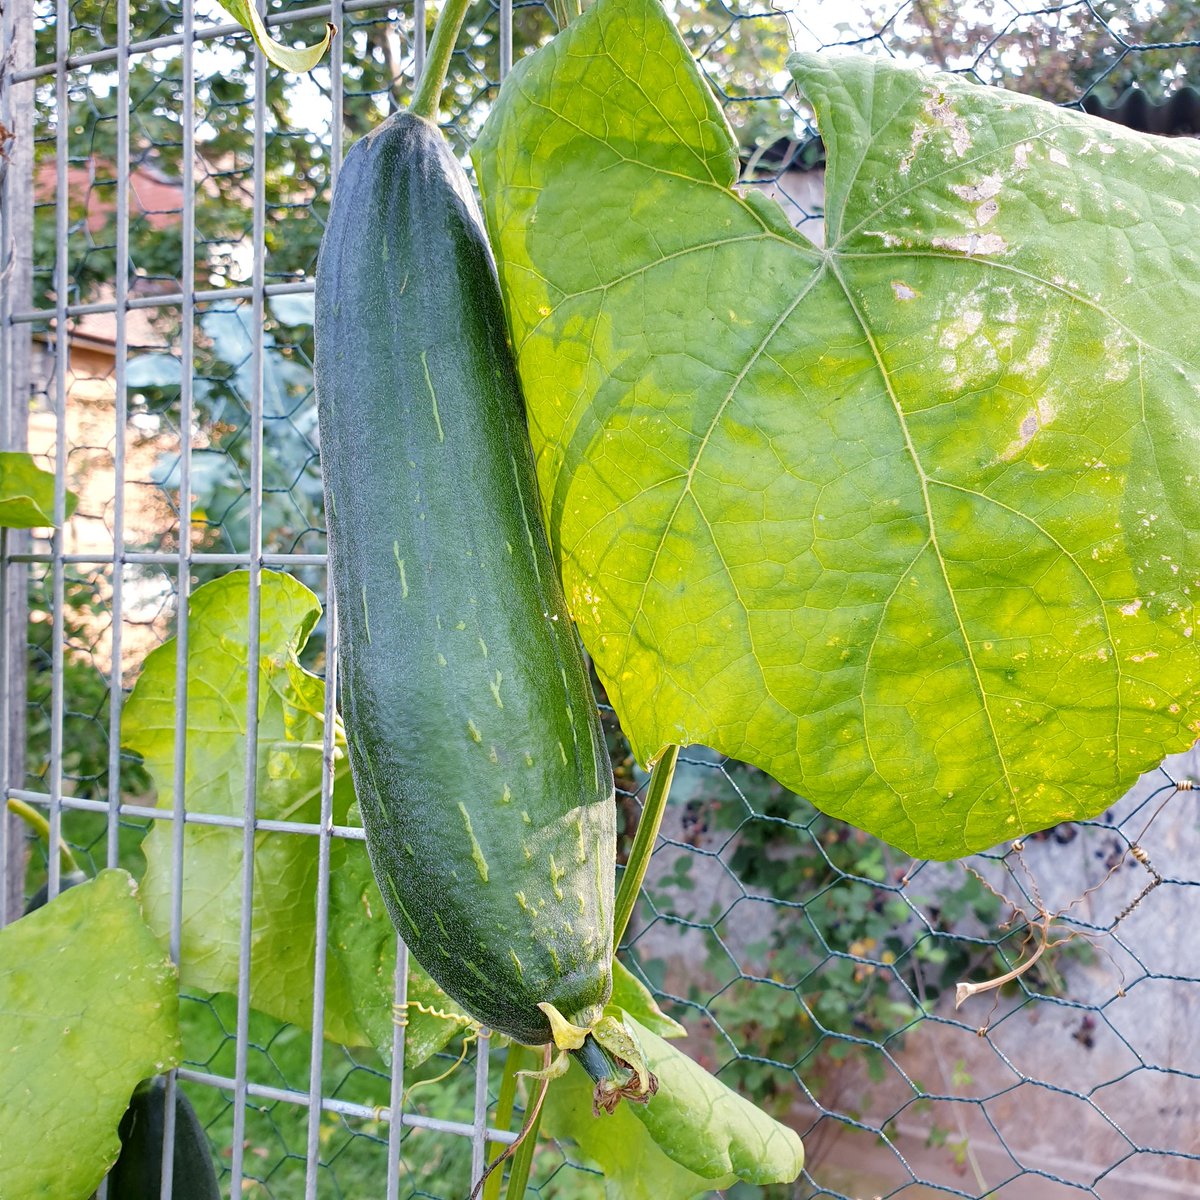 My baby luffa on the plot!
Happy with their progress so far!🌞 I am growing them for sponges, not for eating though!🤣 Have 3 luffas on one plant.🙂
#growyourown #grownfromseed